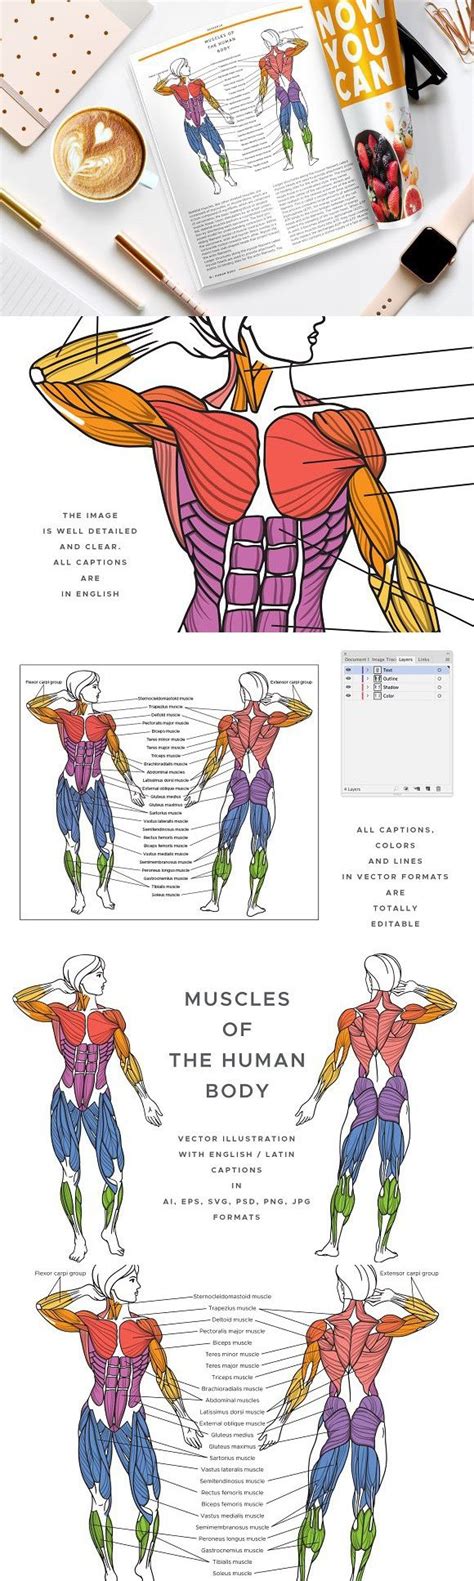 Almost every muscle constitutes one part of a pair of identical bilateral muscles, found on both sides, resulting in approximately 320 pairs of muscles. Muscles Of The Human Body | Human muscular system, Human body, Human